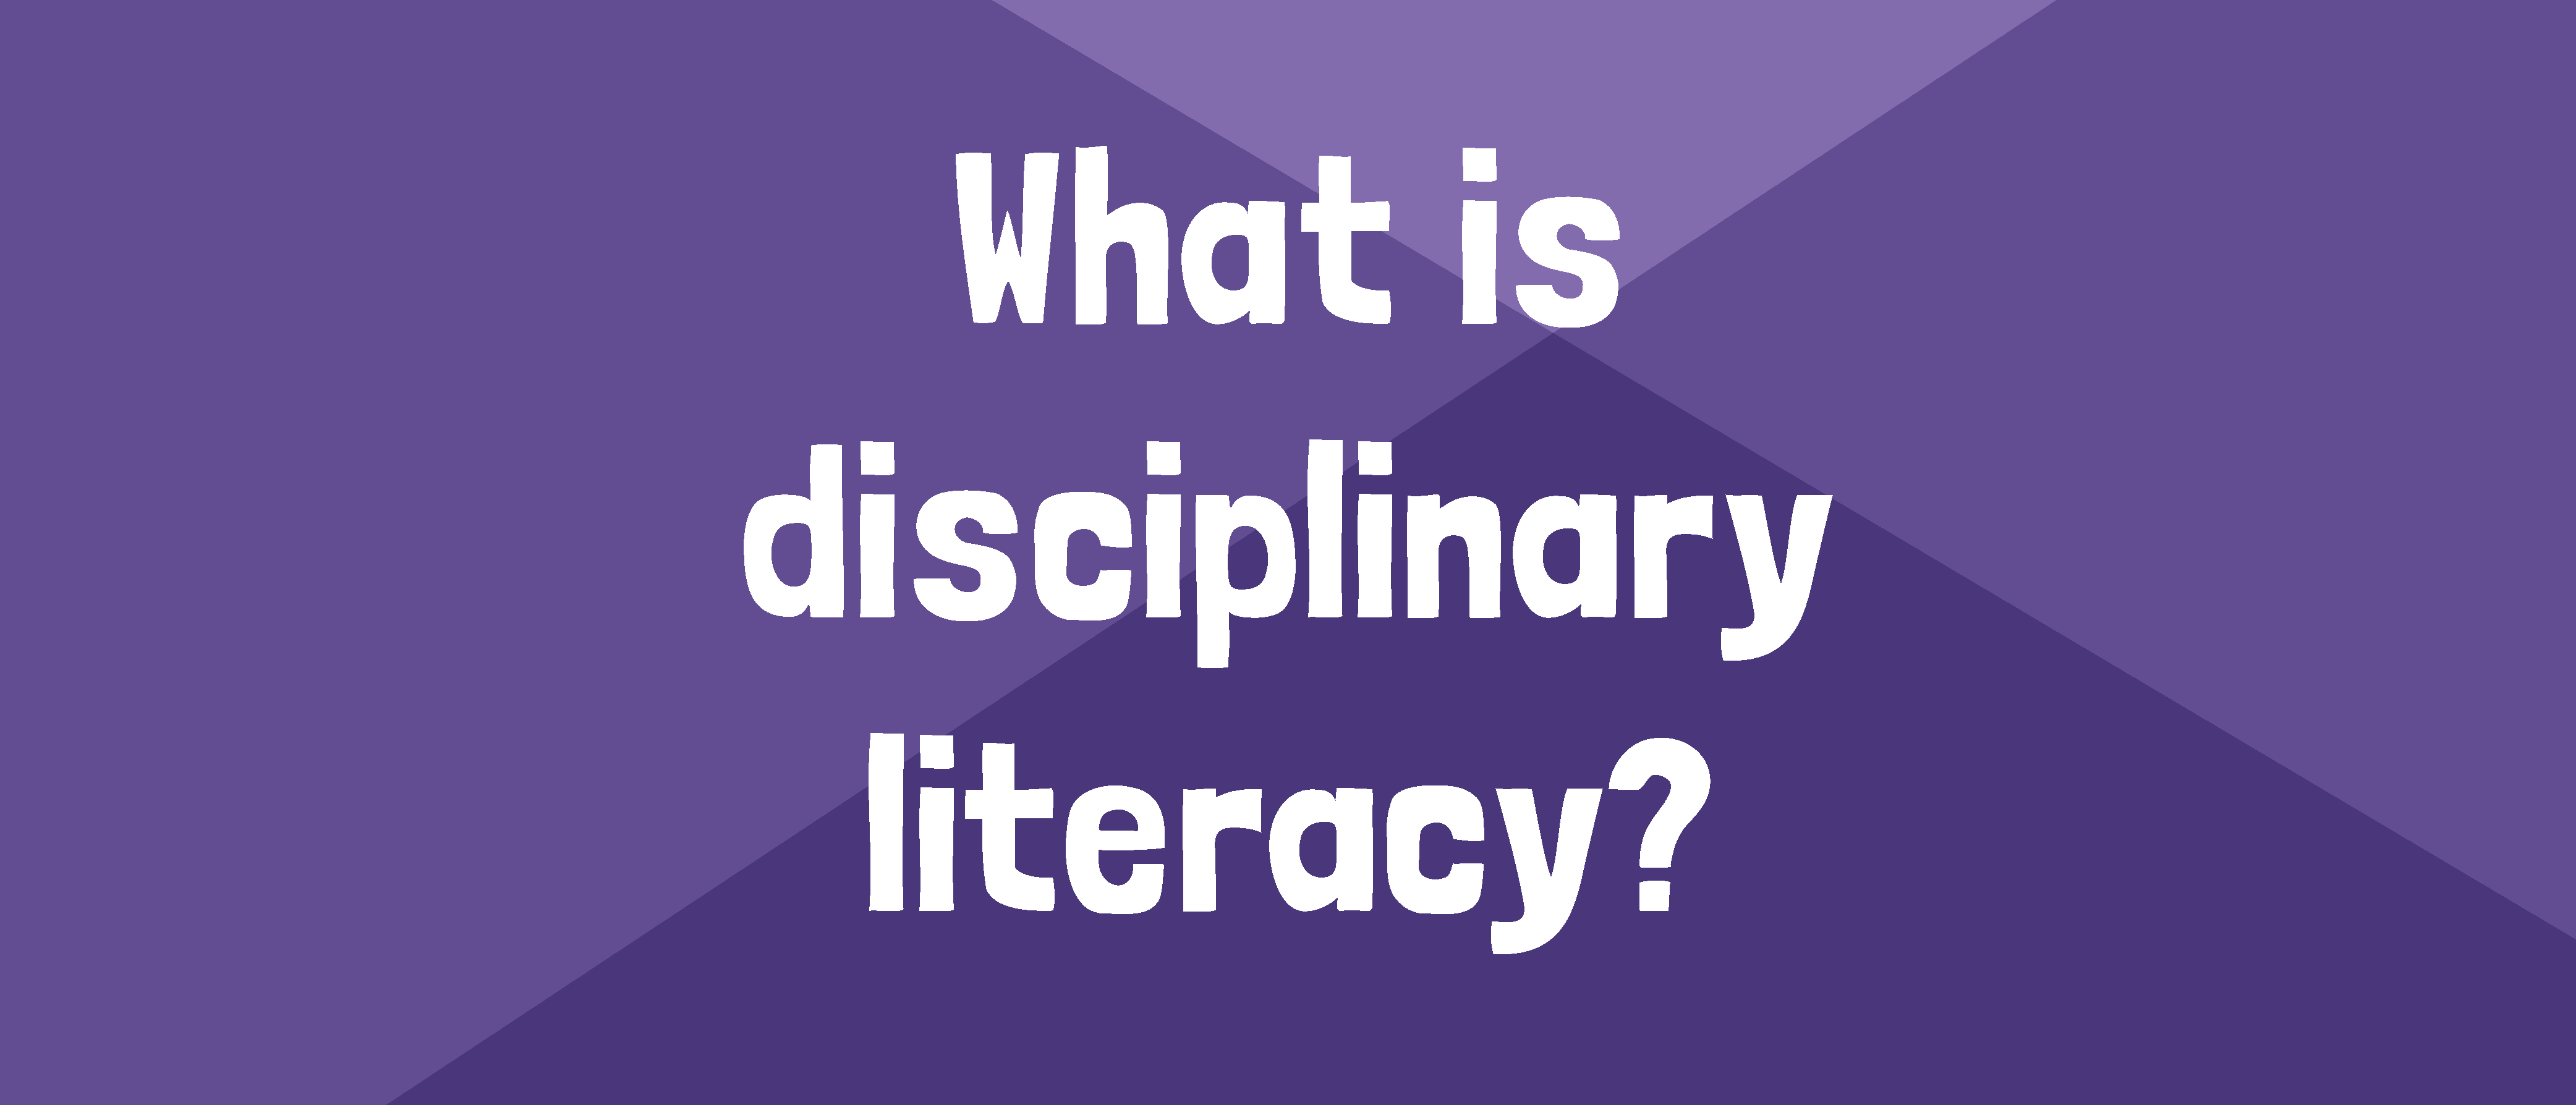 what is disciplinary literacyWEB_BANNER-combined11.png